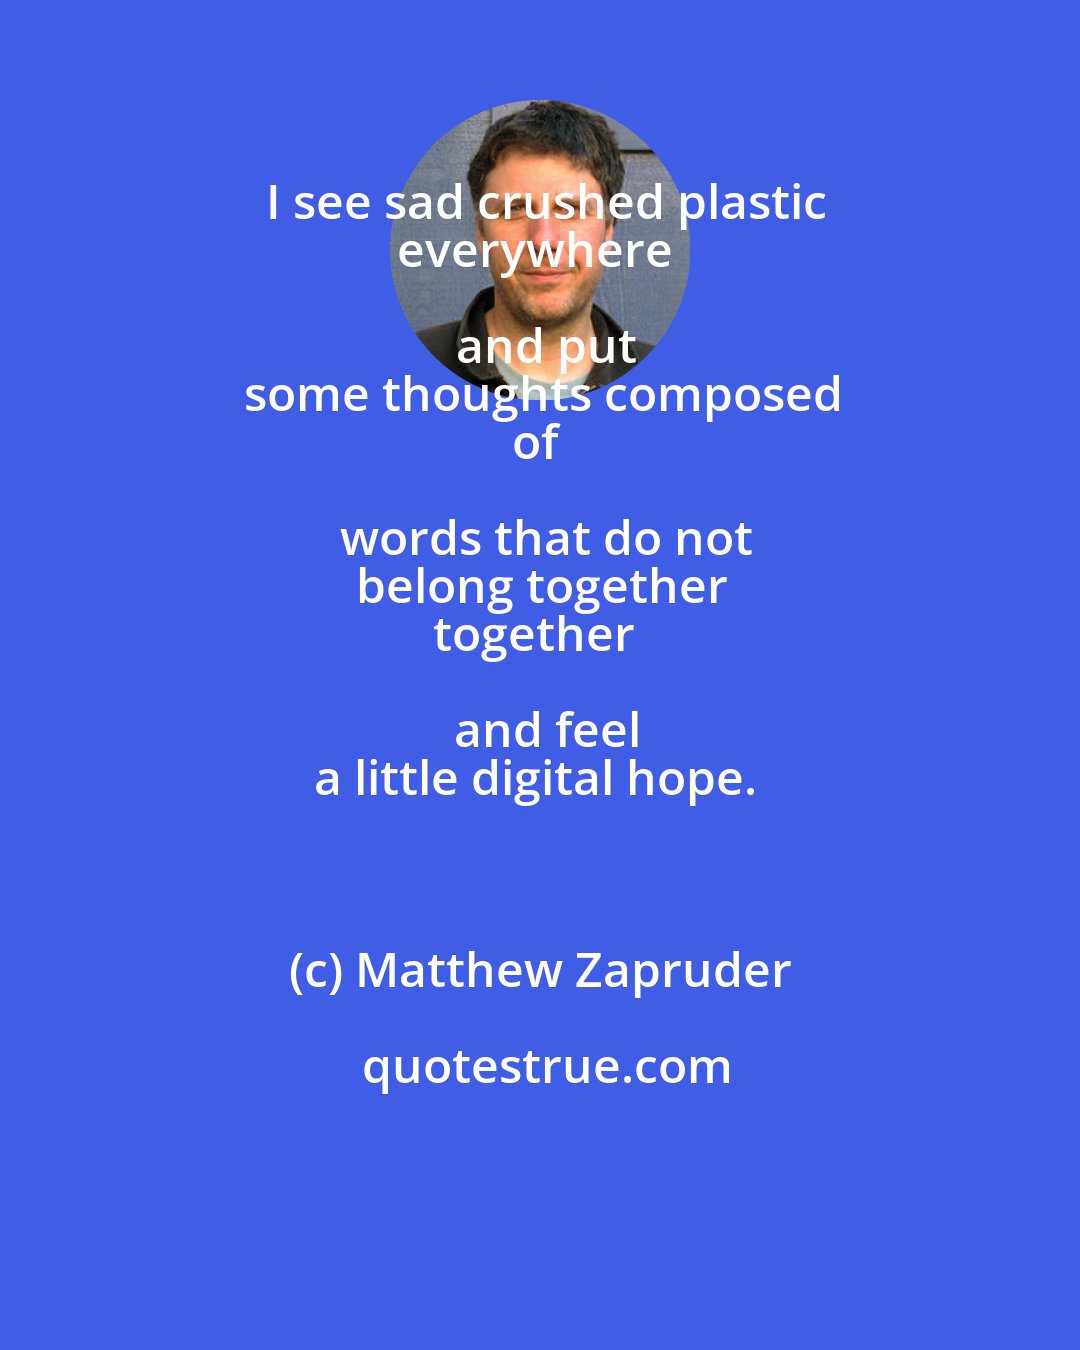 Matthew Zapruder: I see sad crushed plastic
everywhere and put
some thoughts composed
of words that do not
belong together
together and feel
a little digital hope.